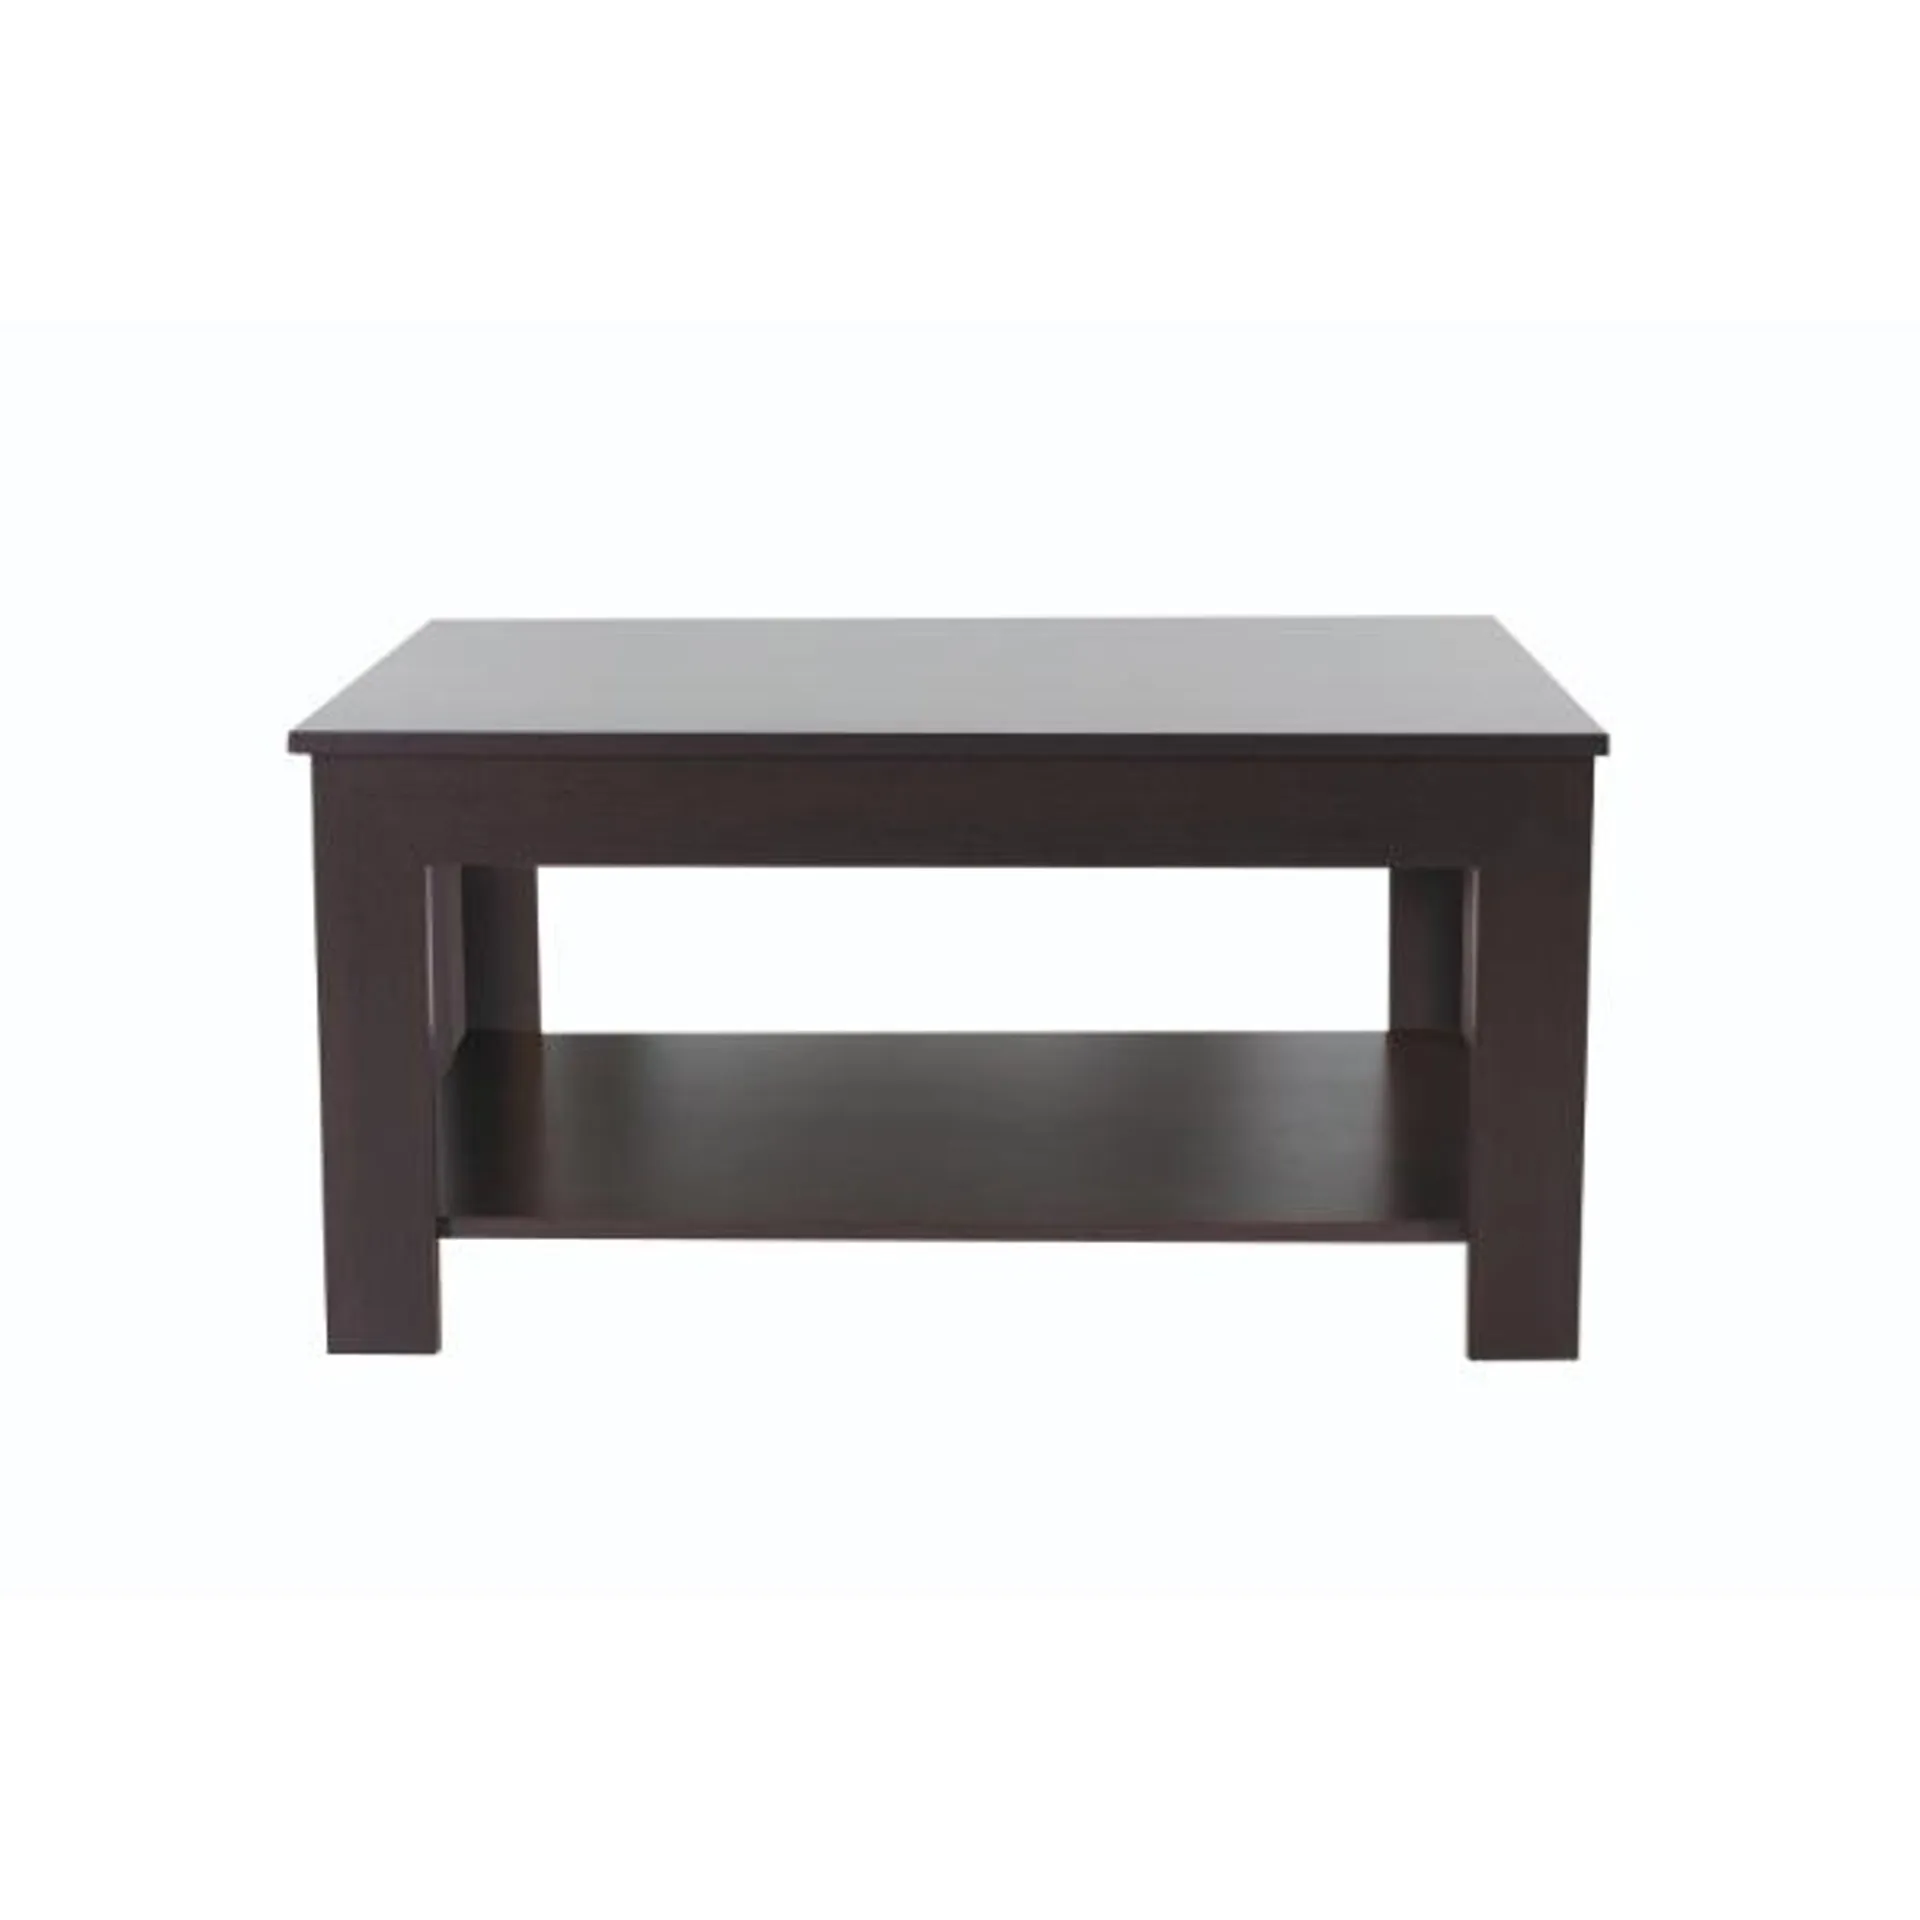 Chicago Coffee Table High Gloss Finish Black